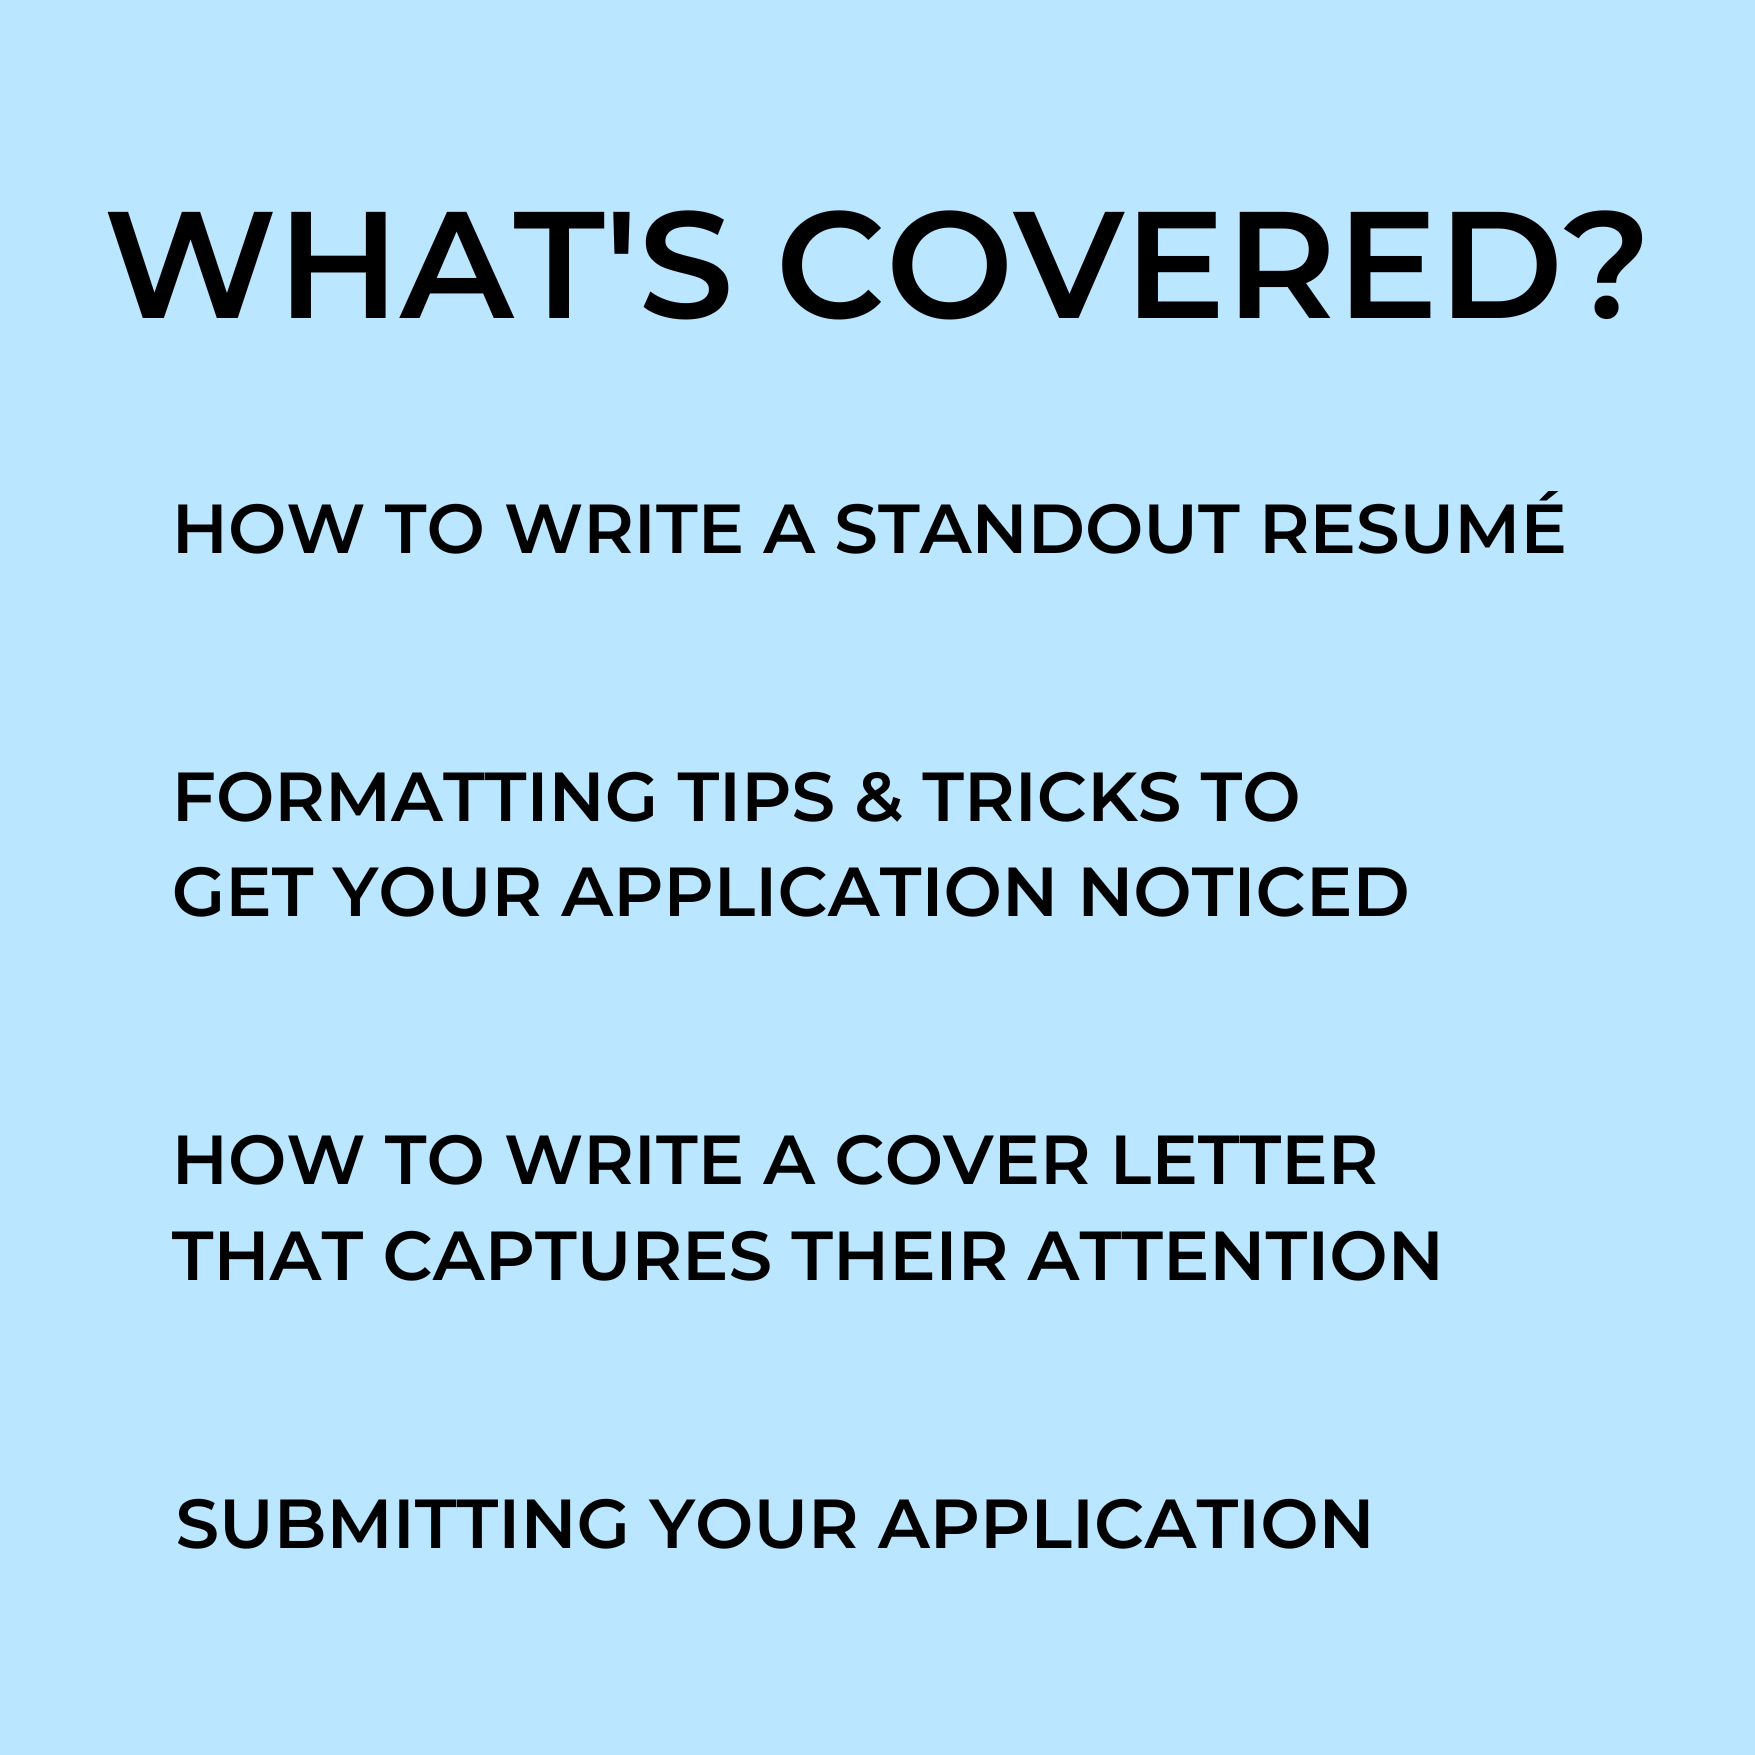 WRITING A WINNING RESUMÉ & COVER LETTER GAME PLAN